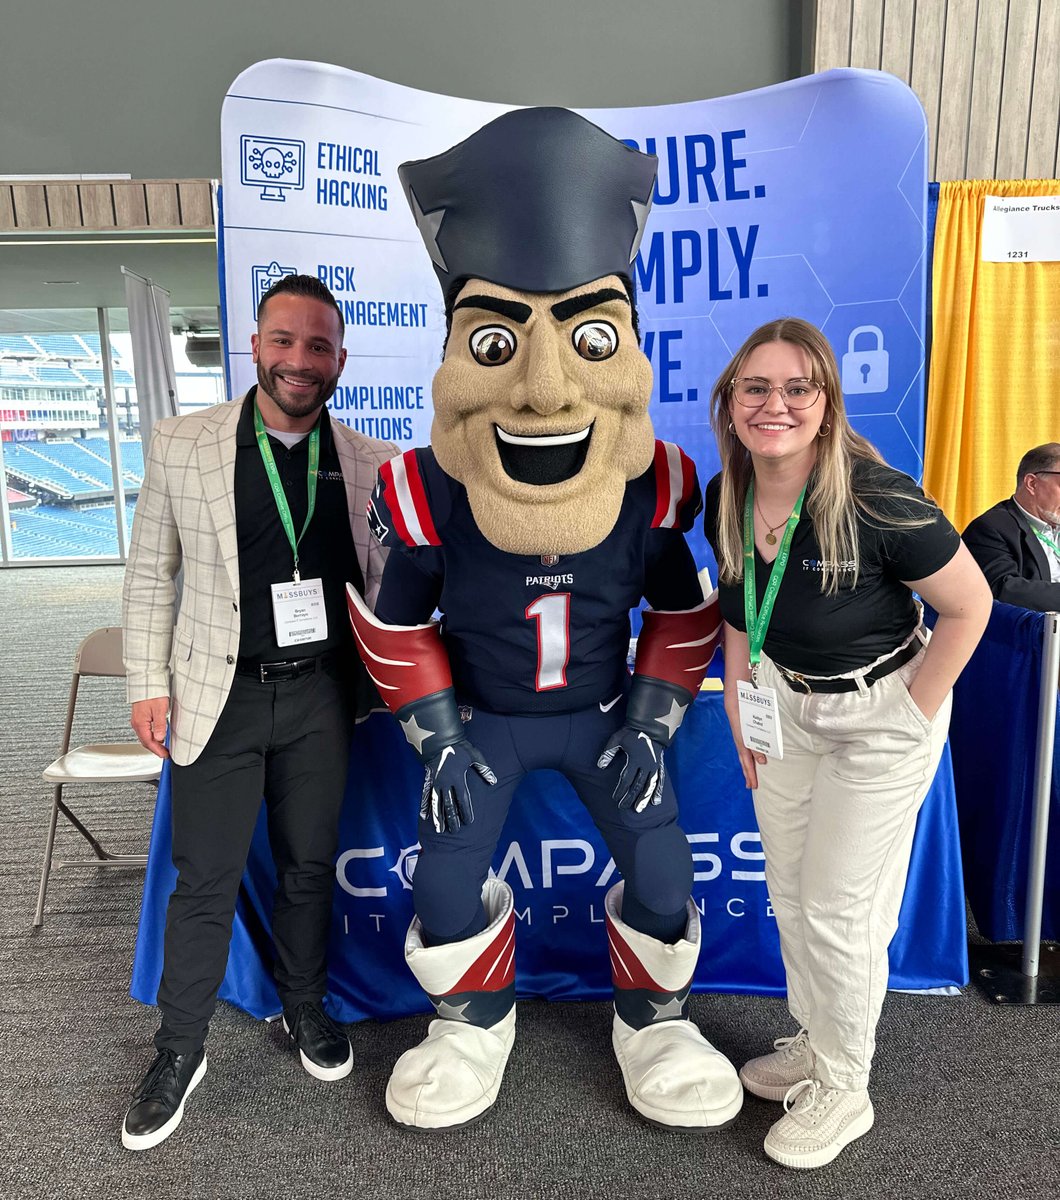 A special guest graced our table earlier today during the MASSBUYS EXPO at Gillette Stadium!